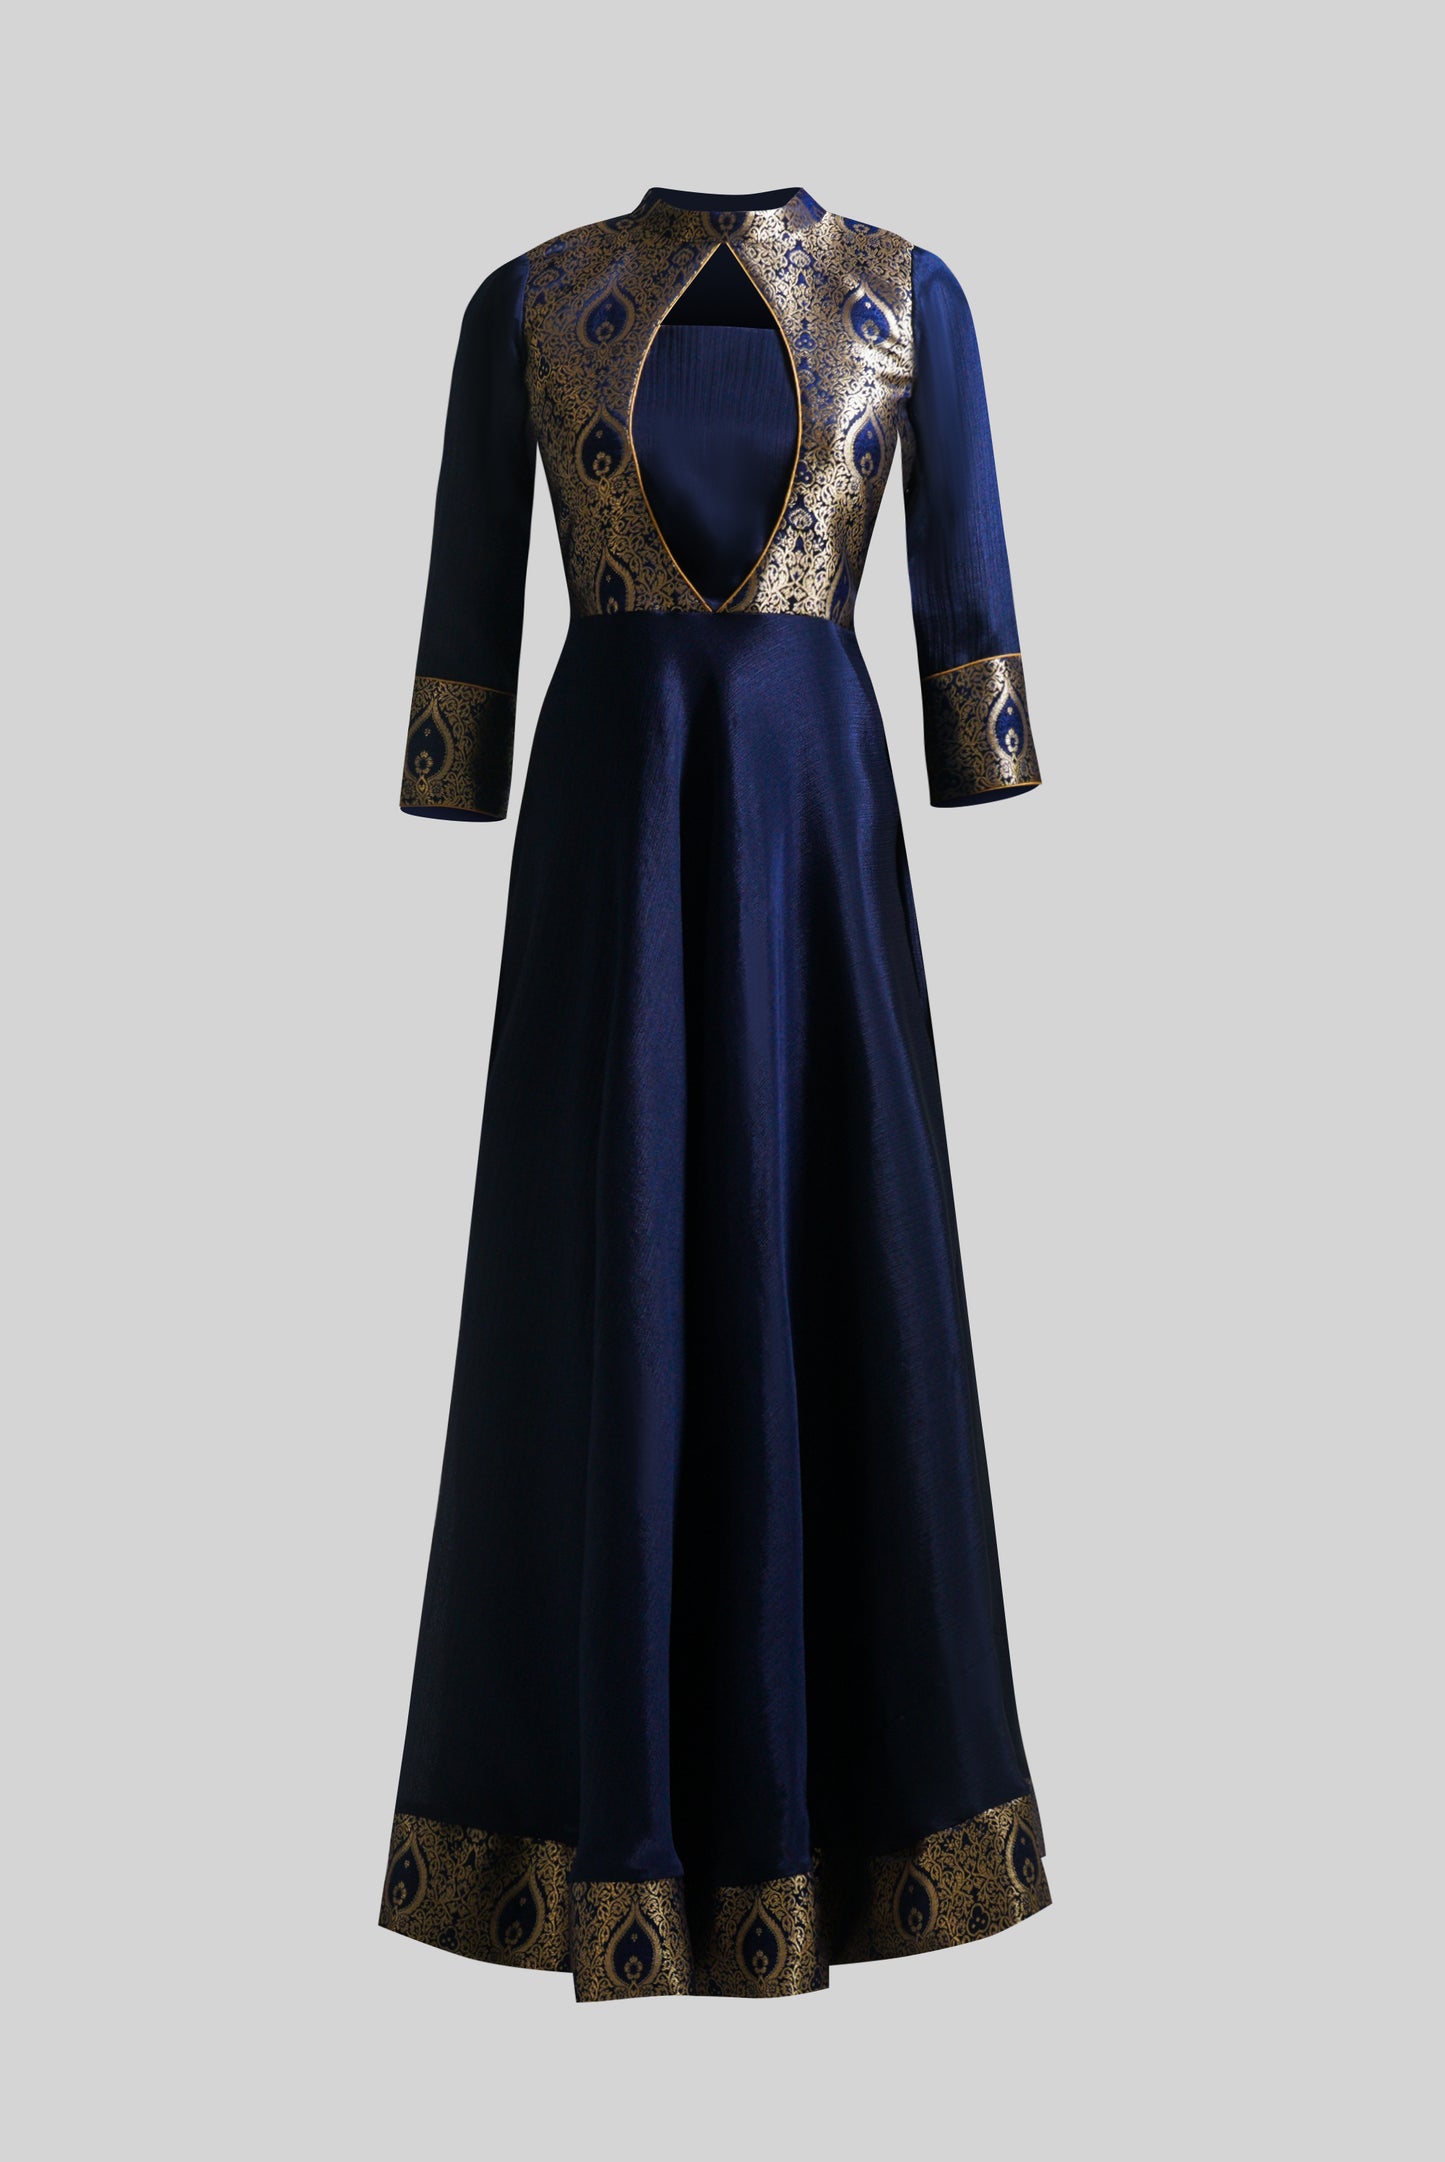 ZIA245 Blue Brocade Collared Gown